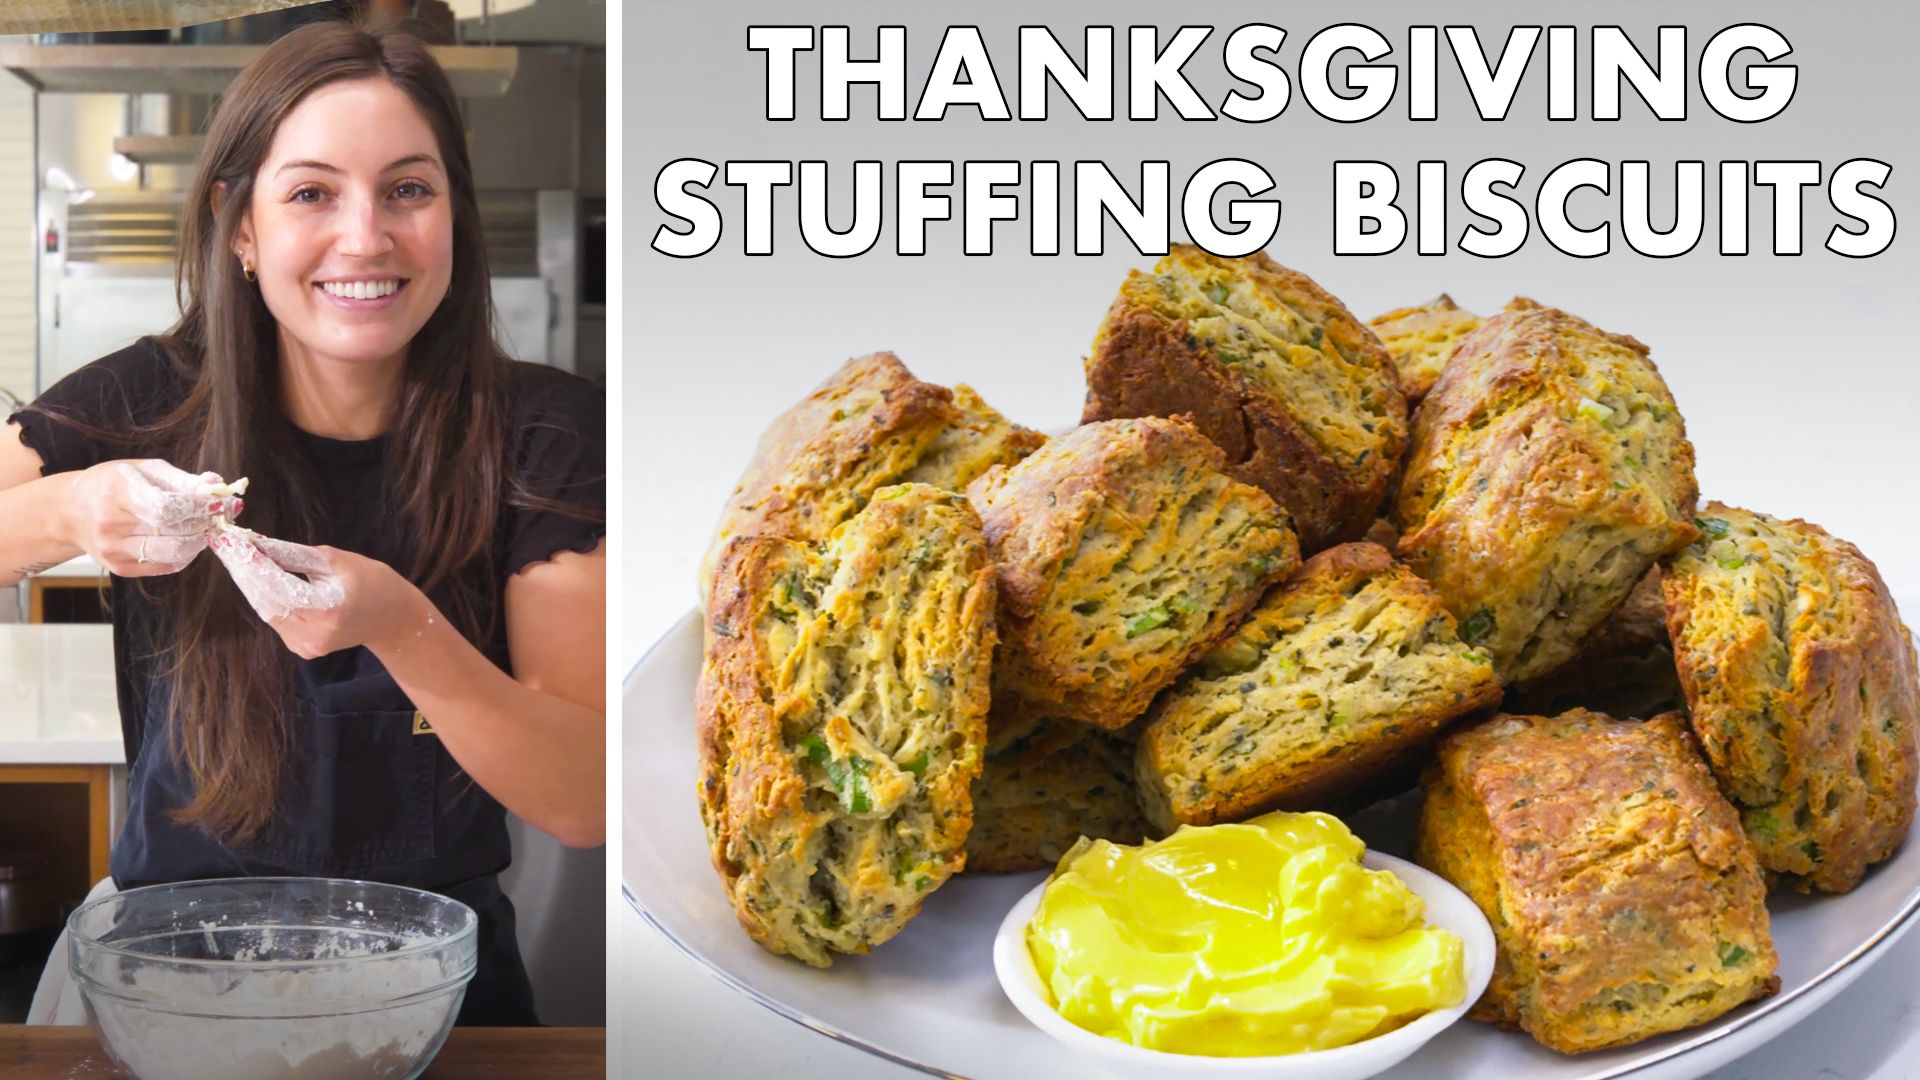 Kendra Makes Thanksgiving Stuffing Biscuits.